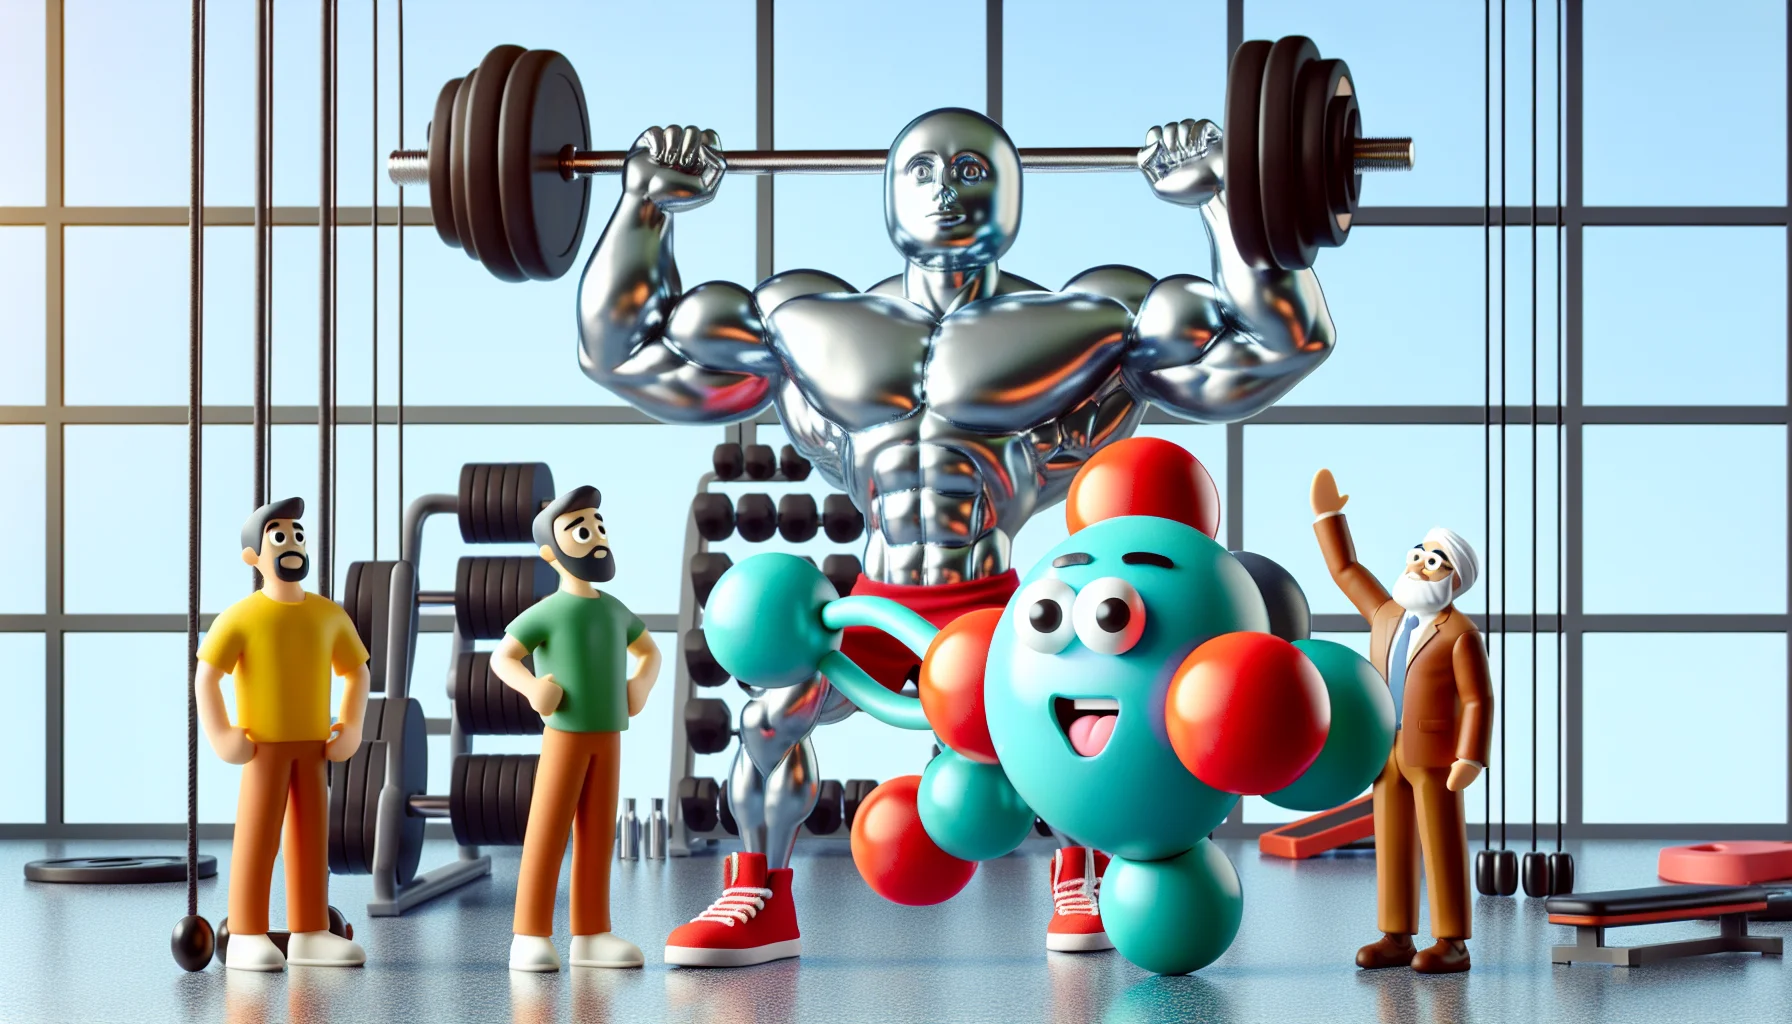 An attention-grabbing and humorous scene with magnesium nitride personified. Imagine a muscular character, taking the shape of a magnesium nitride molecule, with arms and legs robustly built, demonstrating a workout in a gym setting. The molecule-character is lifting weights, implicitly indicating that it contributes to increased performance for athletes. Nearby, a couple of bemused human figures of diverse descent, one Hispanic female and one Middle-Eastern male, are observing with wide eyes, symbolizing the potential customers of sports supplements.